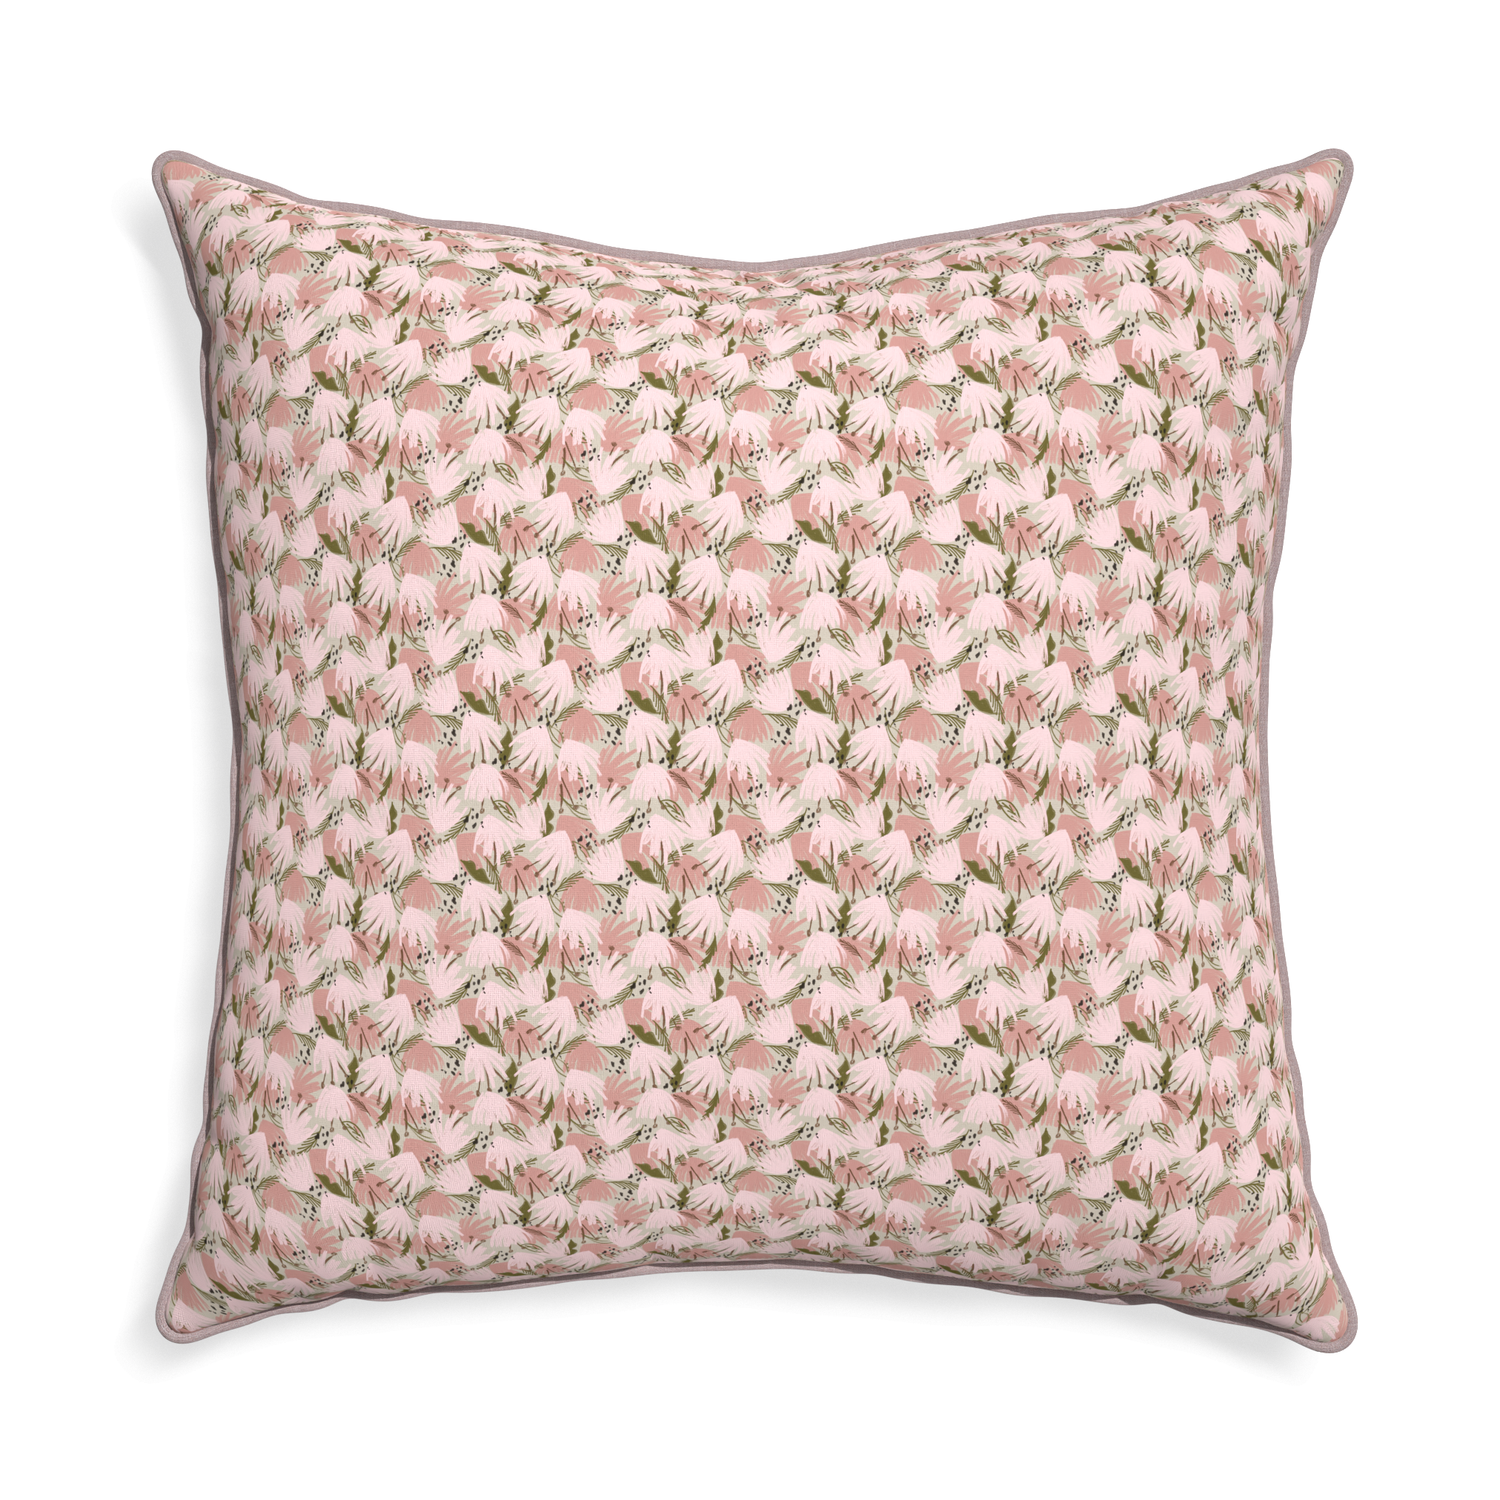 Euro-sham eden pink custom pink floralpillow with orchid piping on white background